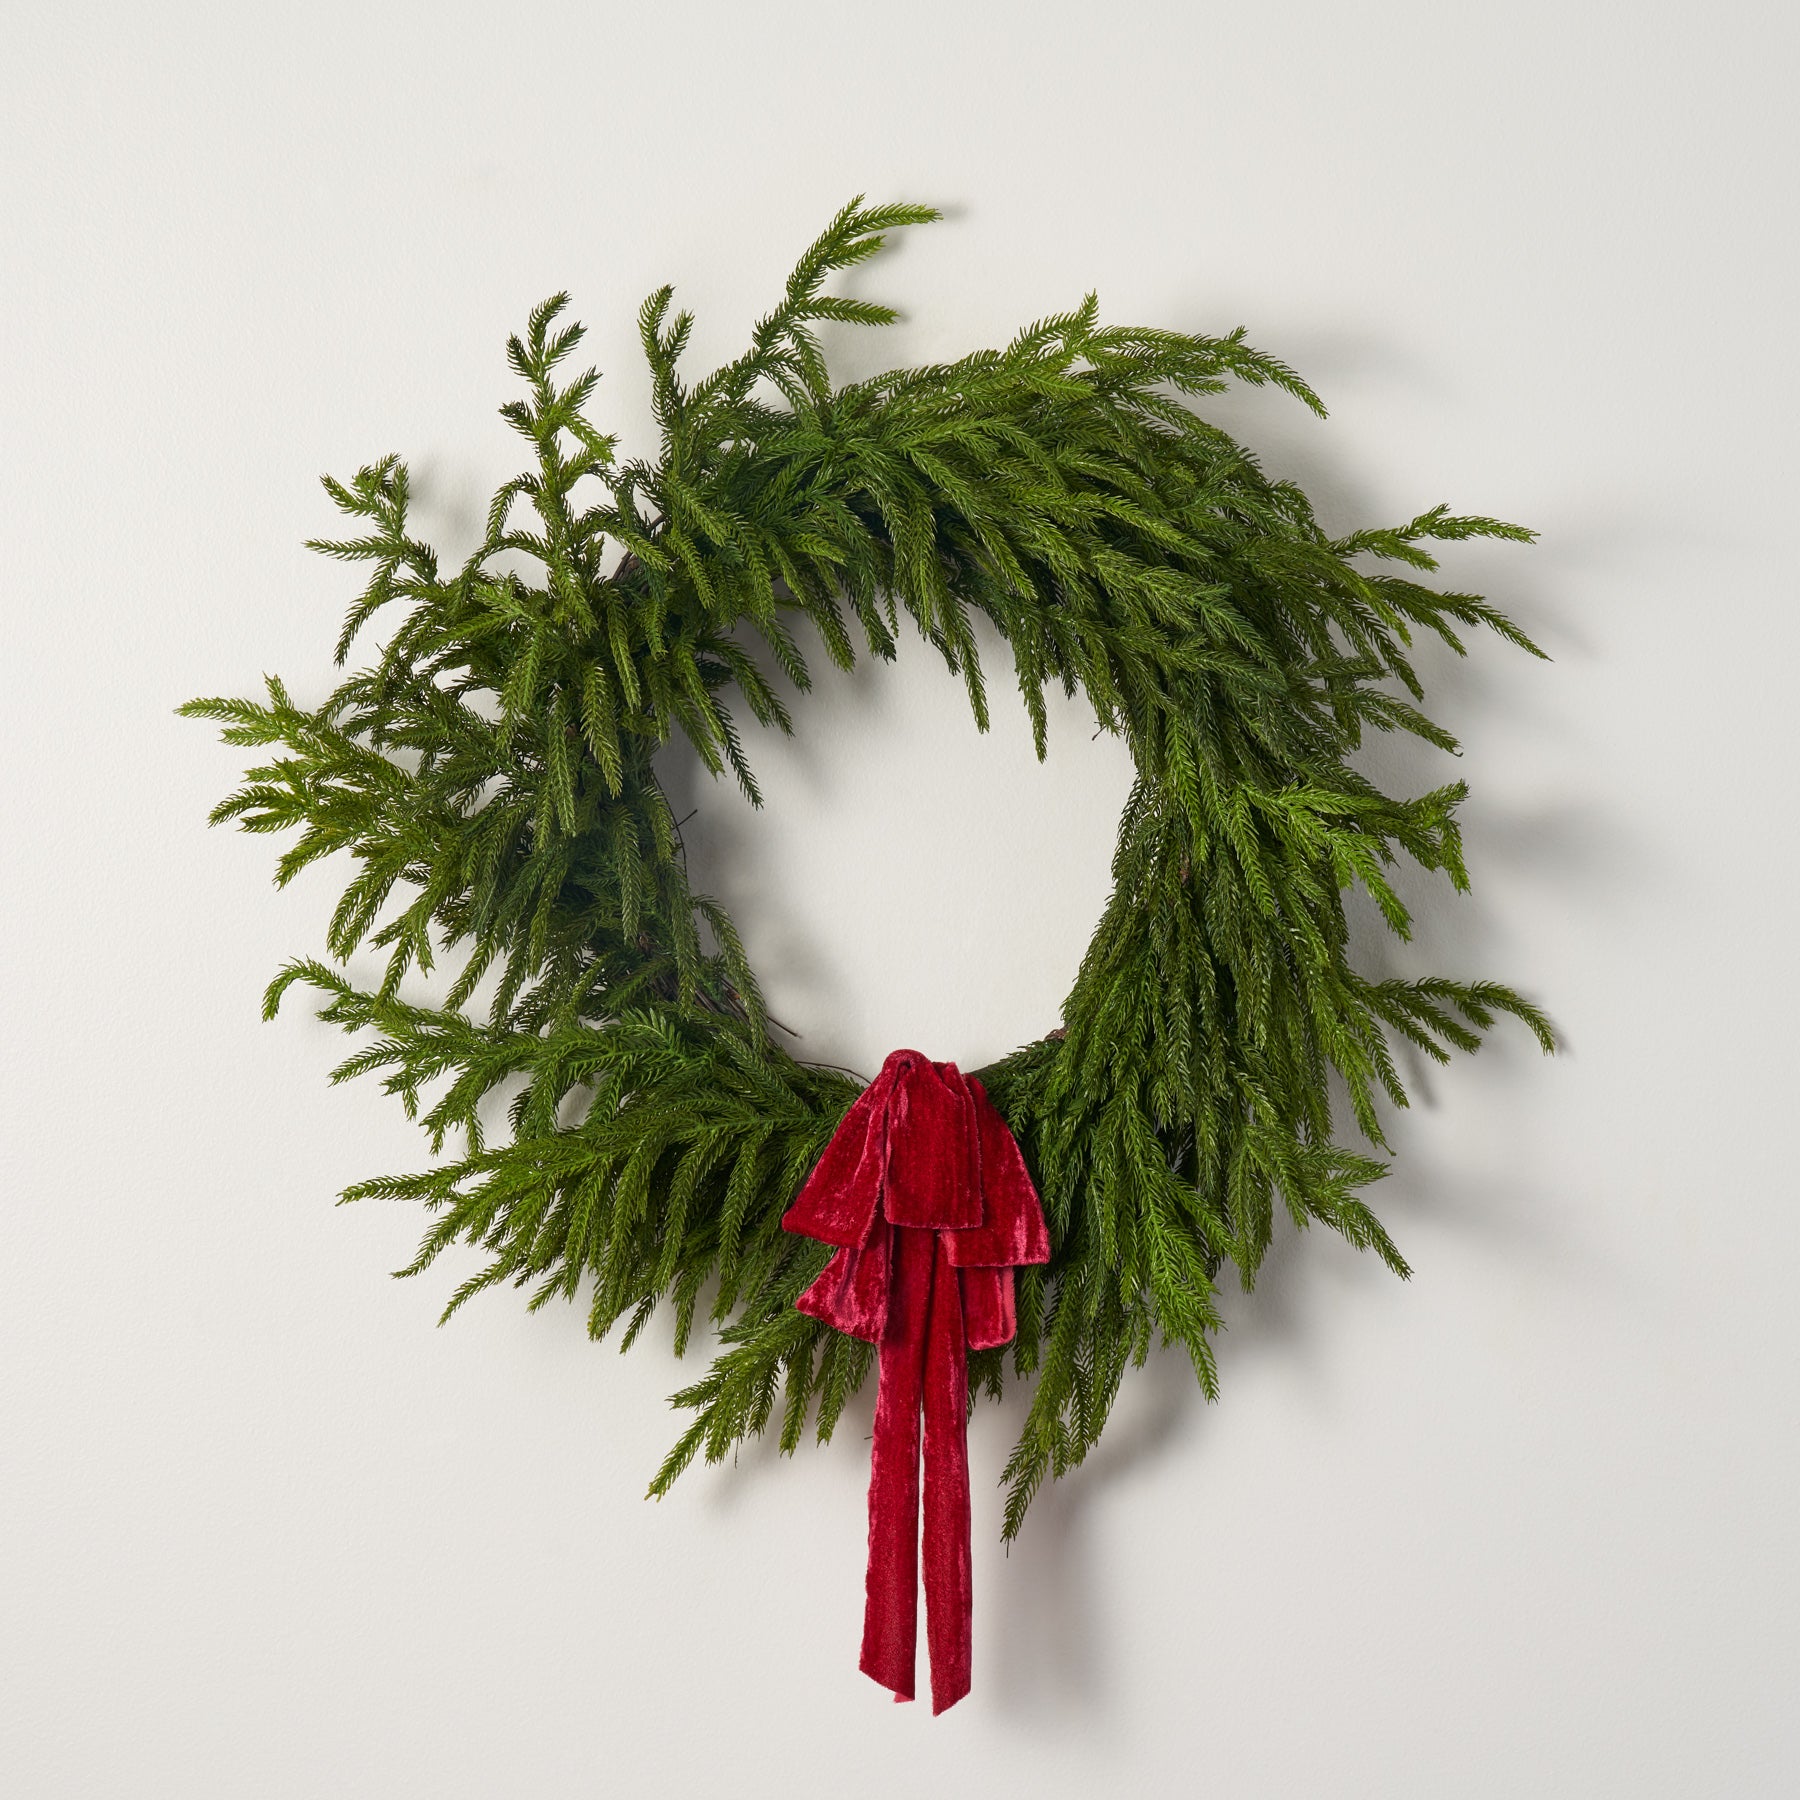 Winter Christmas Greenery Collection